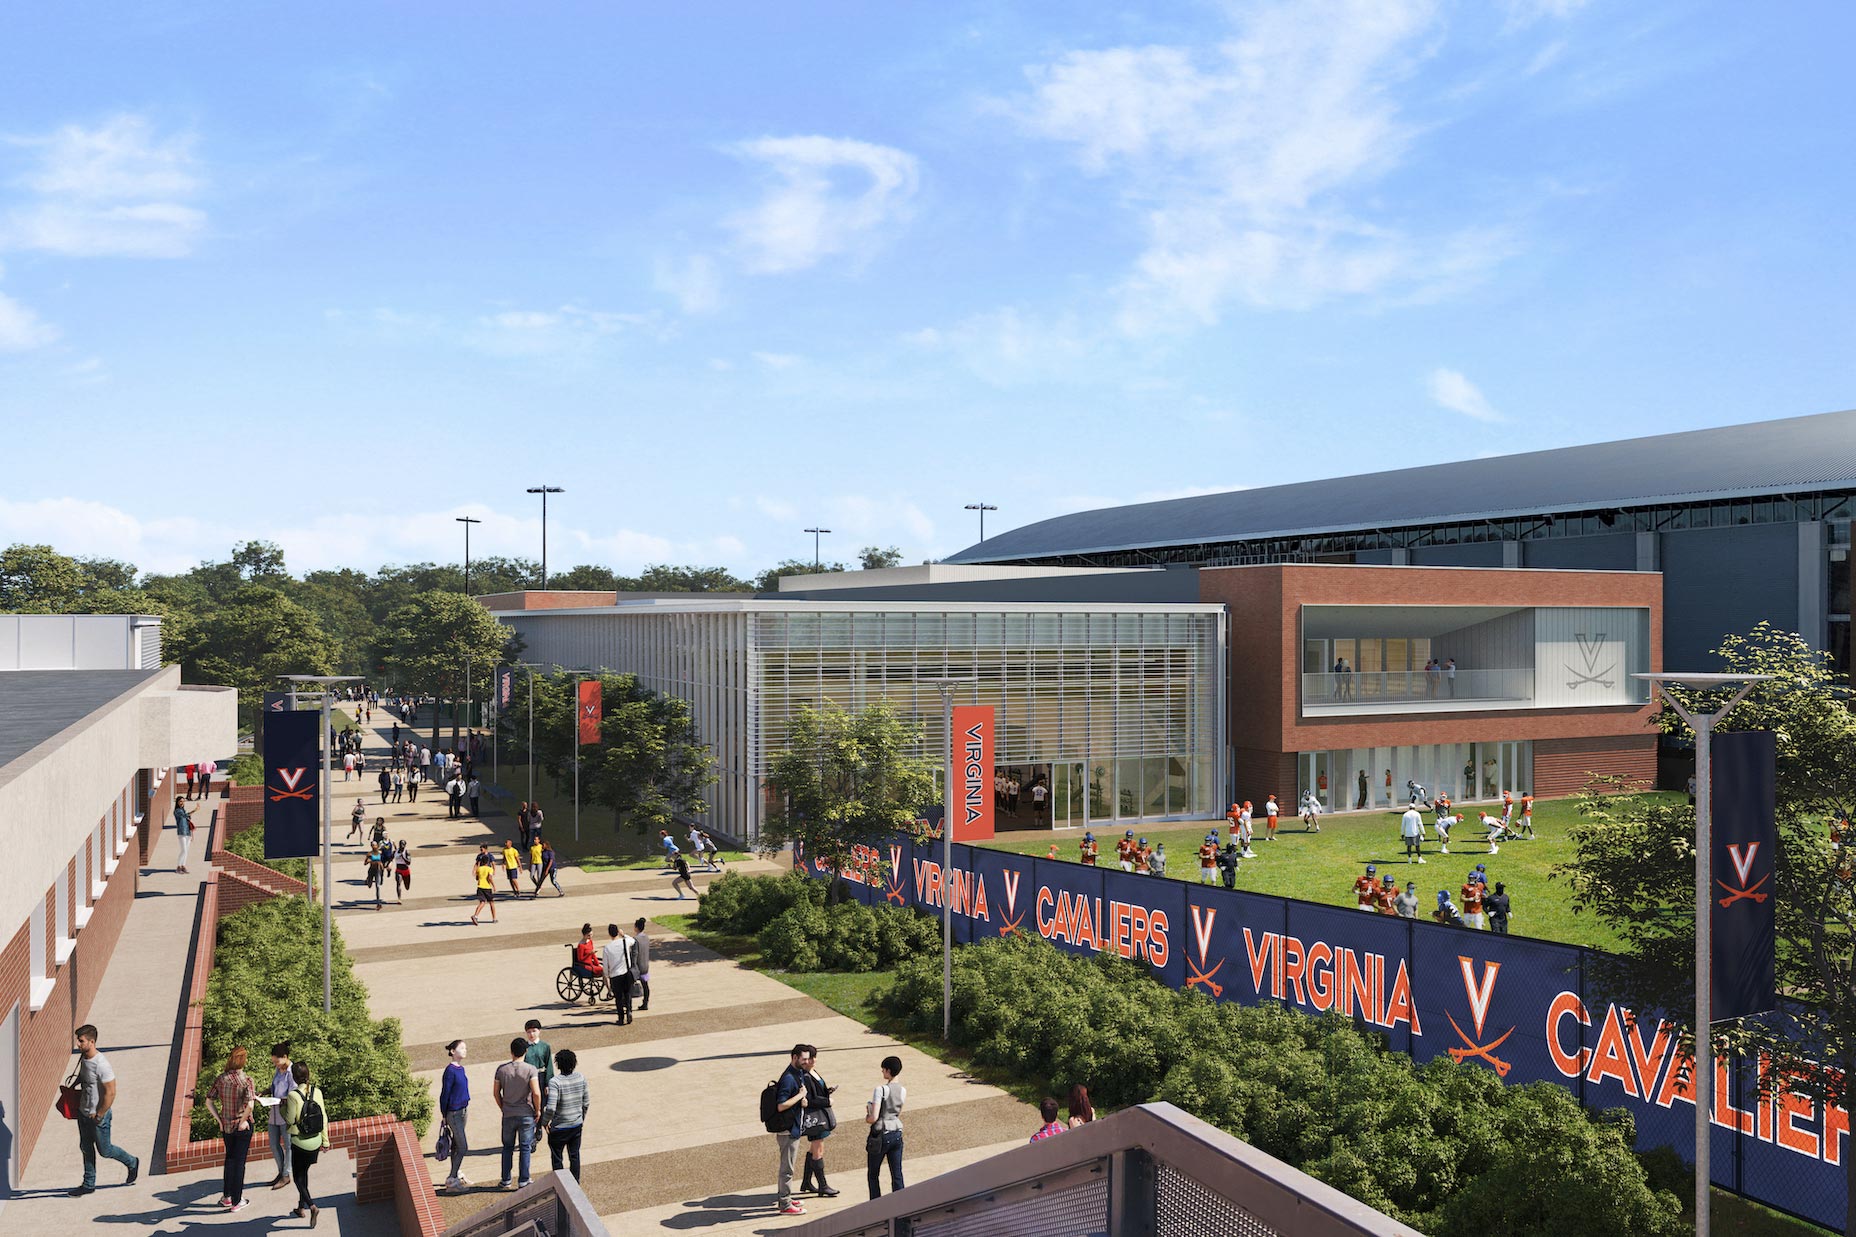 Architectural rendering of a glass building in the UVA sports complex